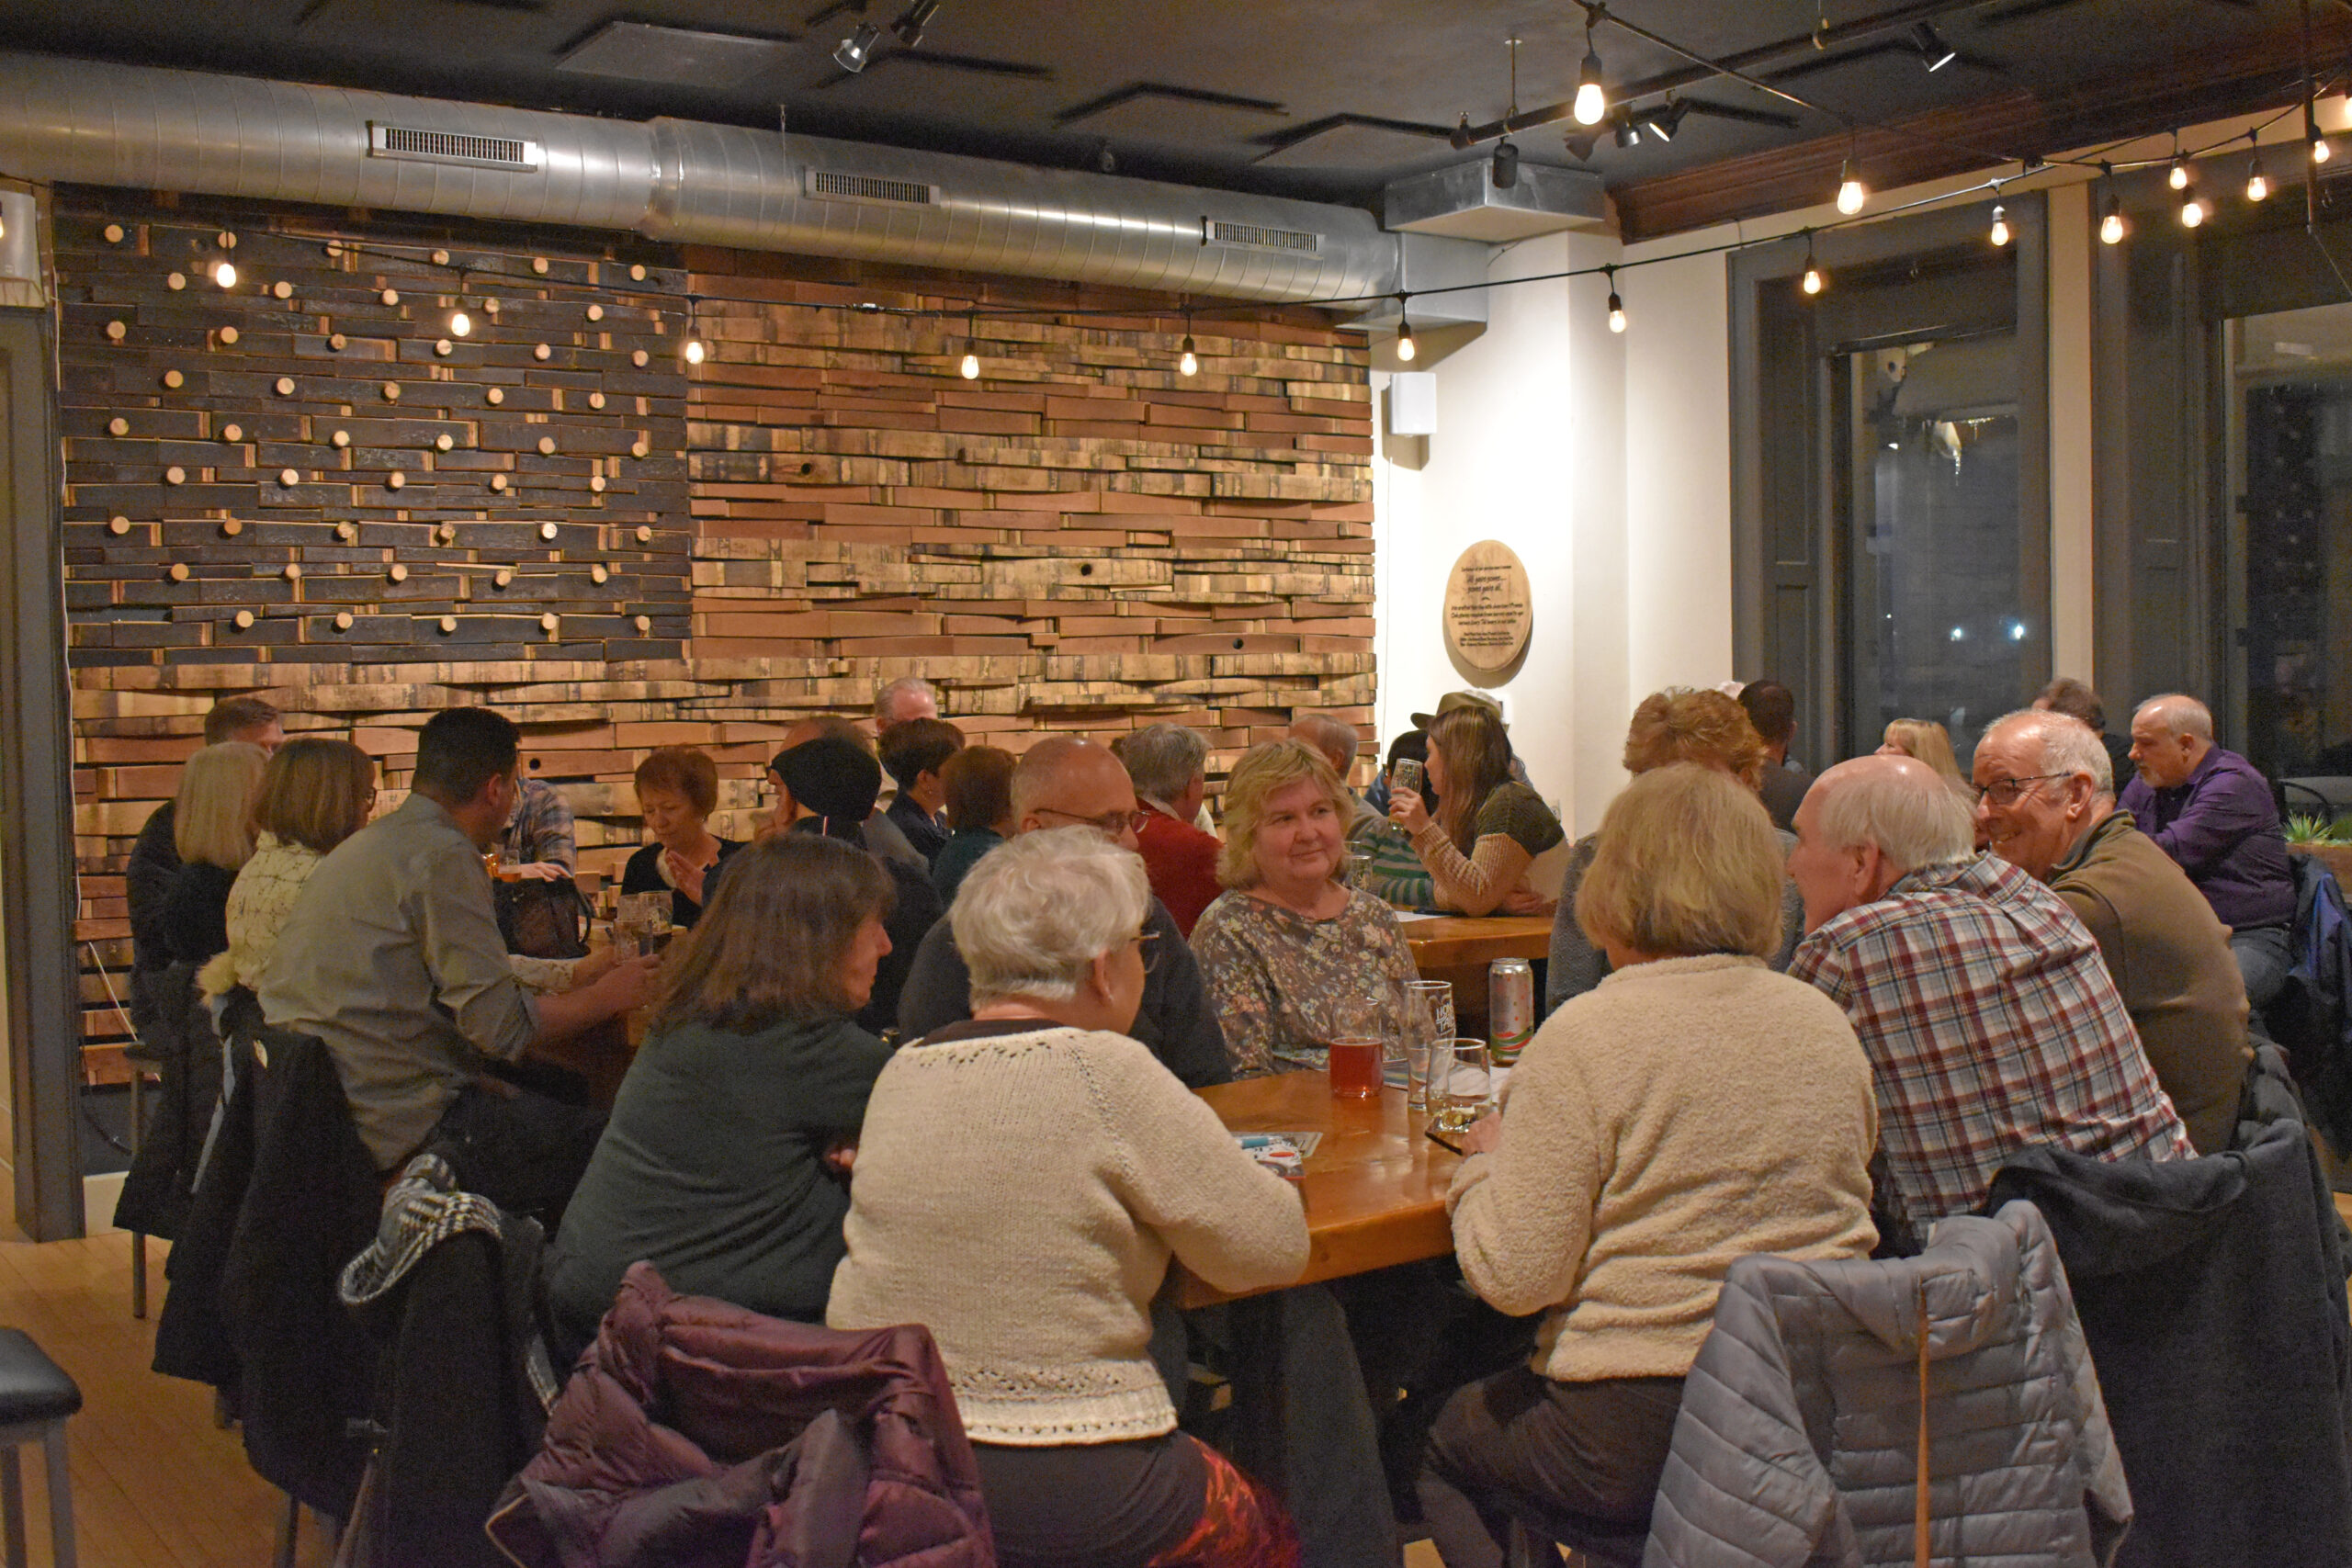 Each month, Fox Valley residents fill a room at Lion's Tail Brewing in Neenah for Short Story Nights, an event where folks discuss a different short story each month. (Joe Schulz/WPR)